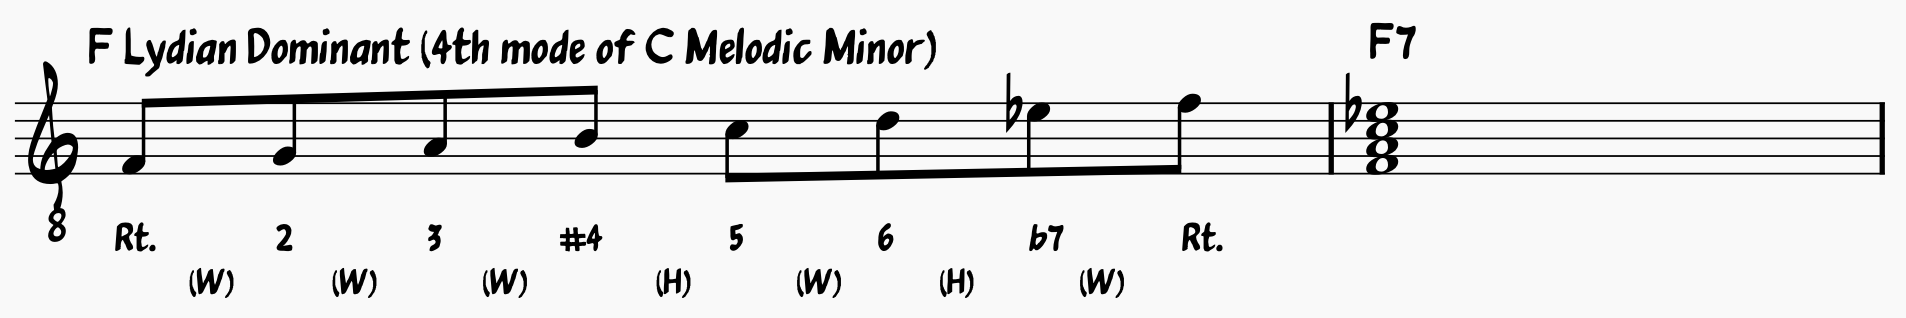 F Lydian Dominant; 4th Mode of the Melodic Minor Scale